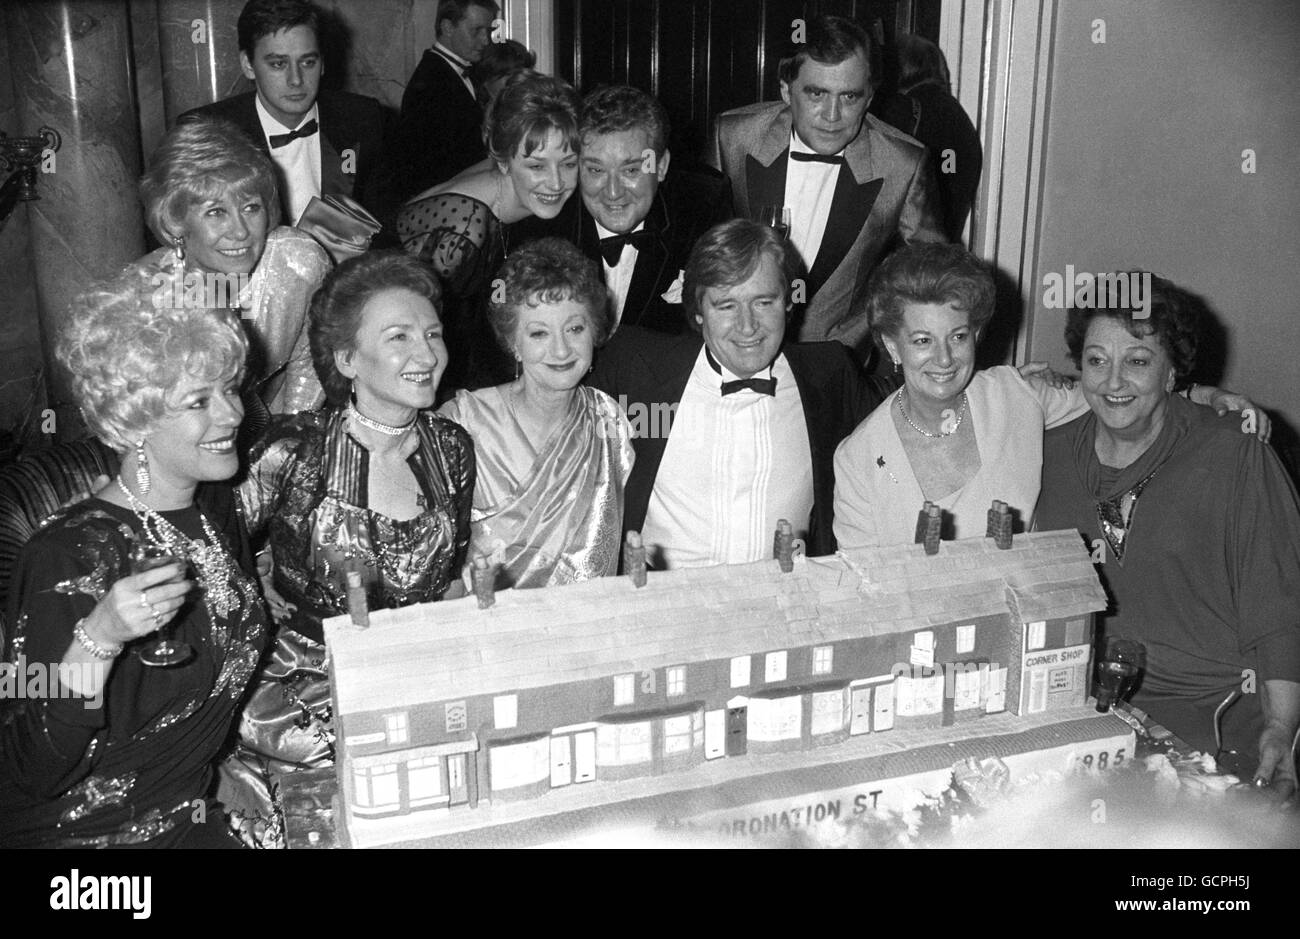 Members of the cast of ITV's soap opera Coronation Street, crowded around a cake replica of the street at the celebration to mark its 25th anniversary at the Dorchester Hotel. Front row, left to right, Julie Goodyear, Eileen Derbyshire, Thelma Barlow, William Roache, Jean Alexander and Betty Driver. Back row, left to right, Liz Dawn, Nigel Pivaro, Anne Kirkbride, Bryan Mosley and Bill Tarmey. Stock Photo